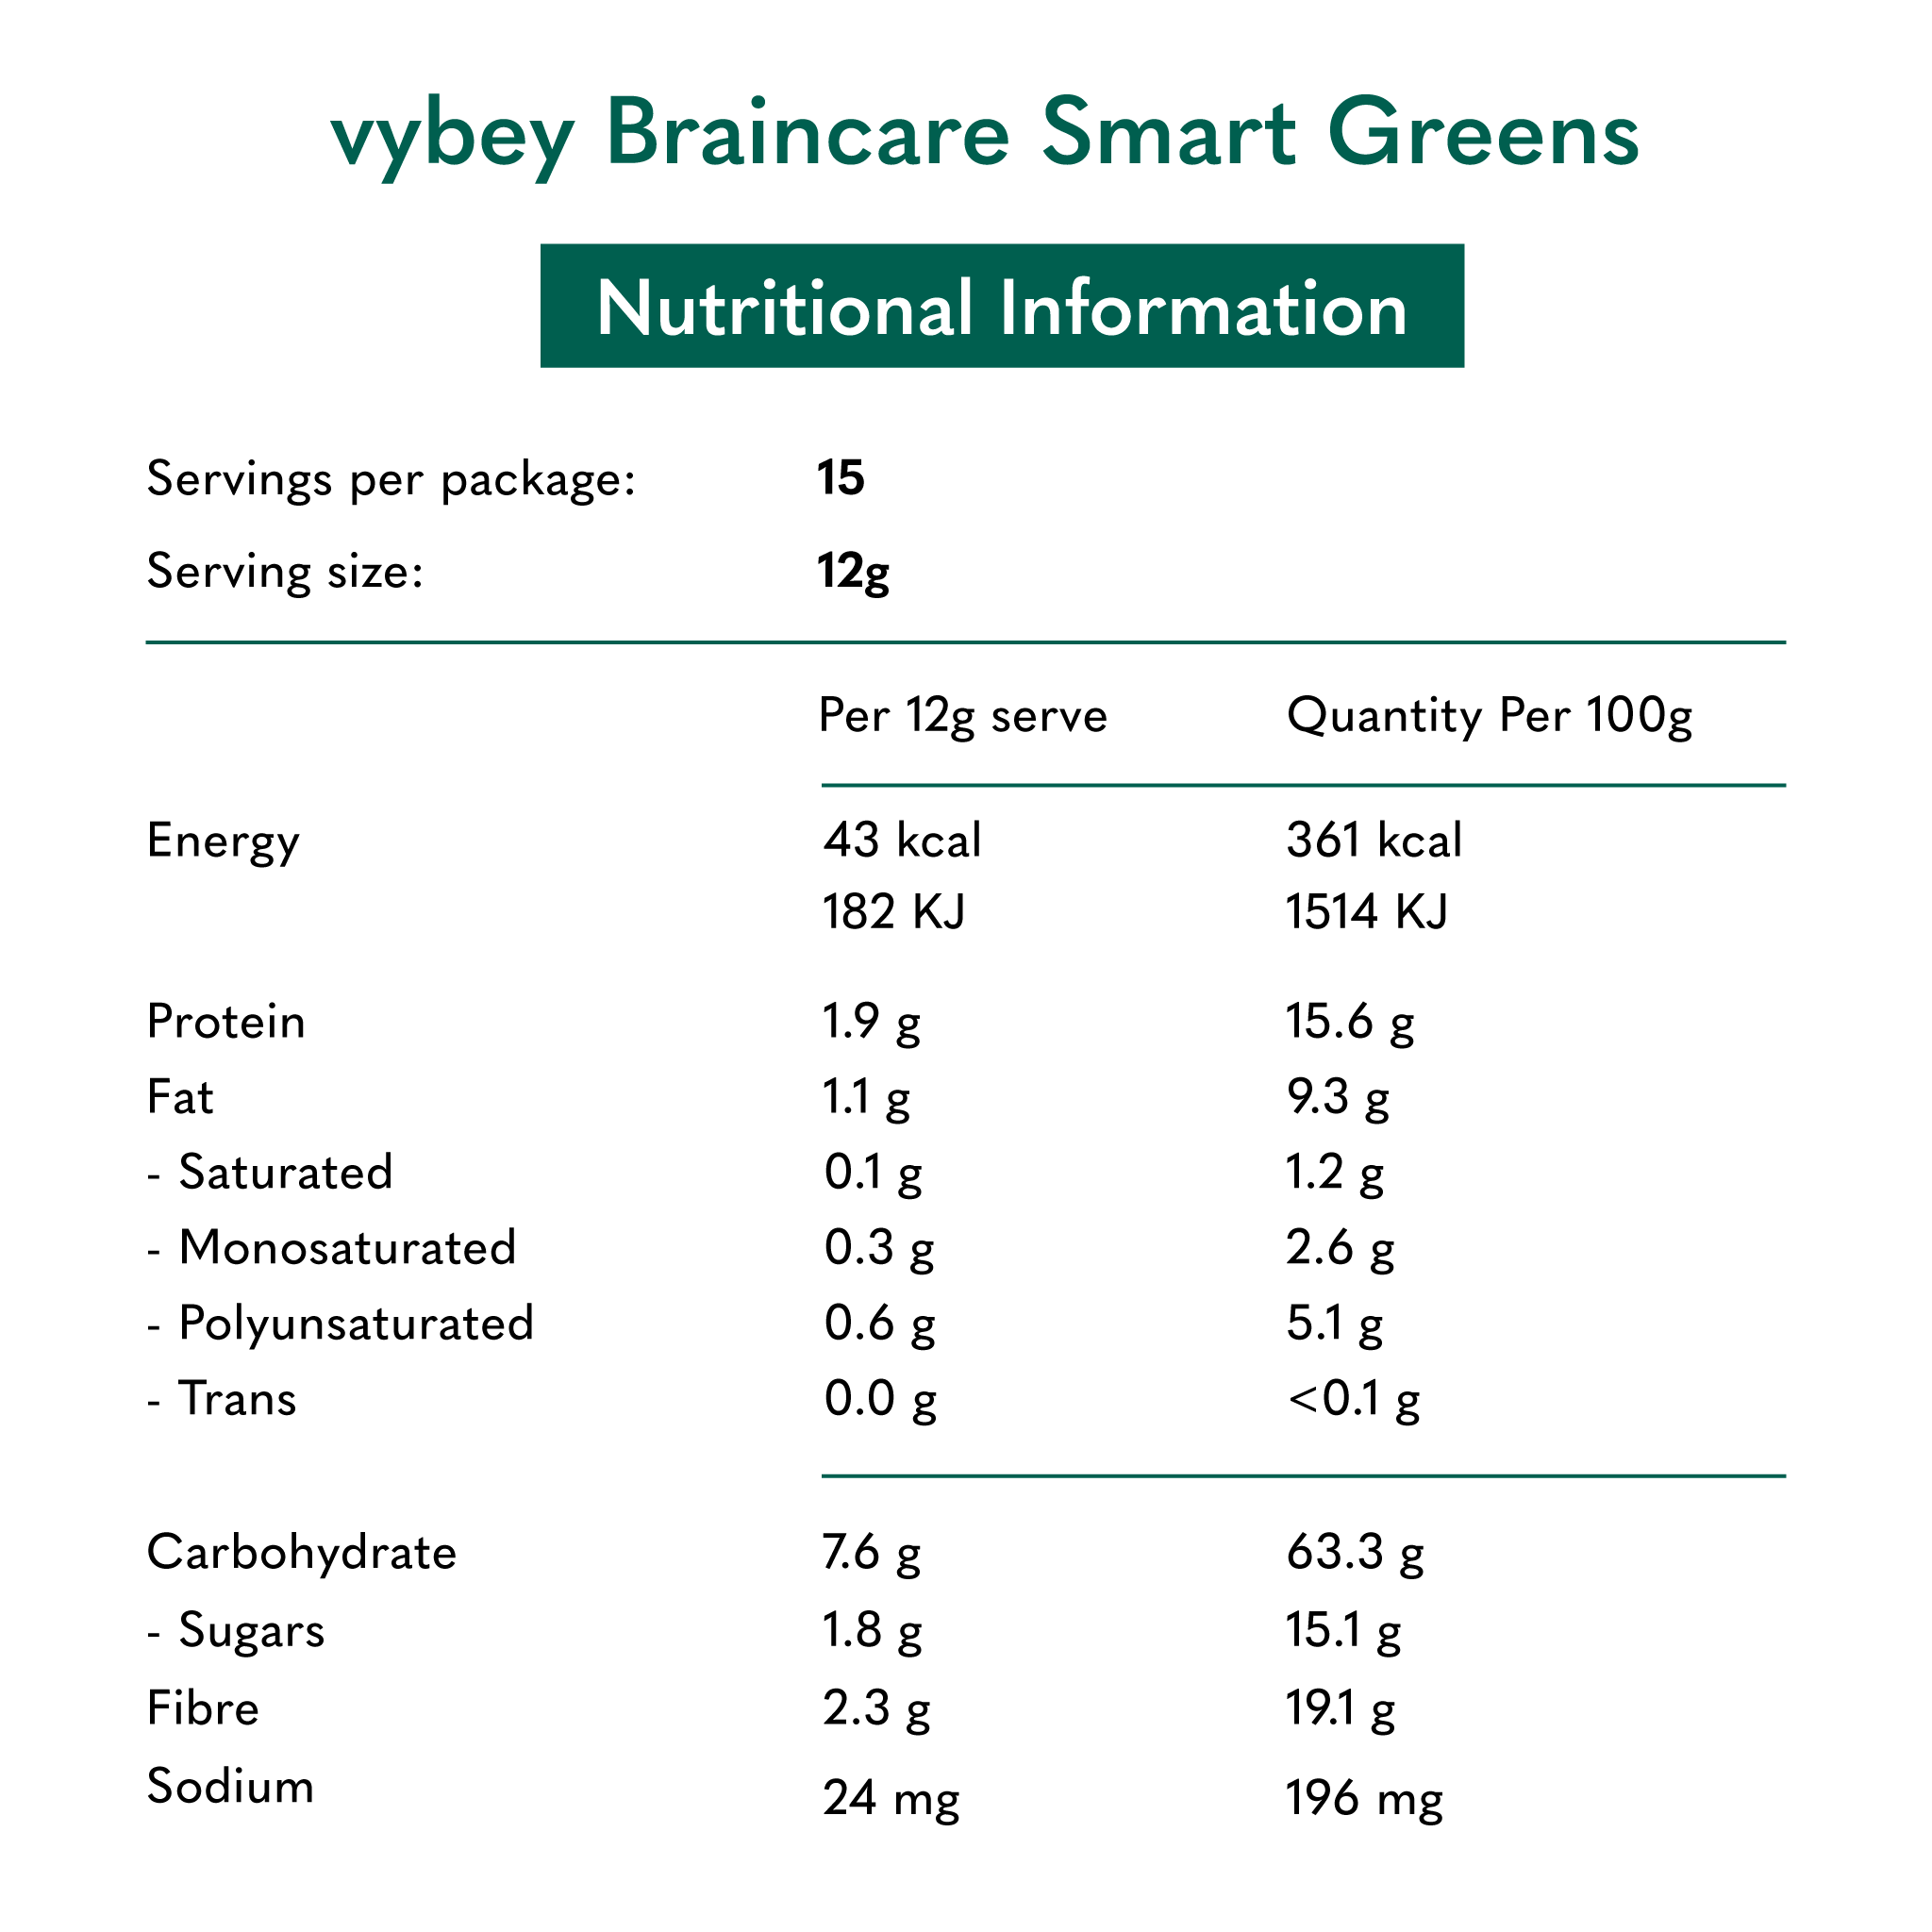 vybey braincare super greens nutritional information